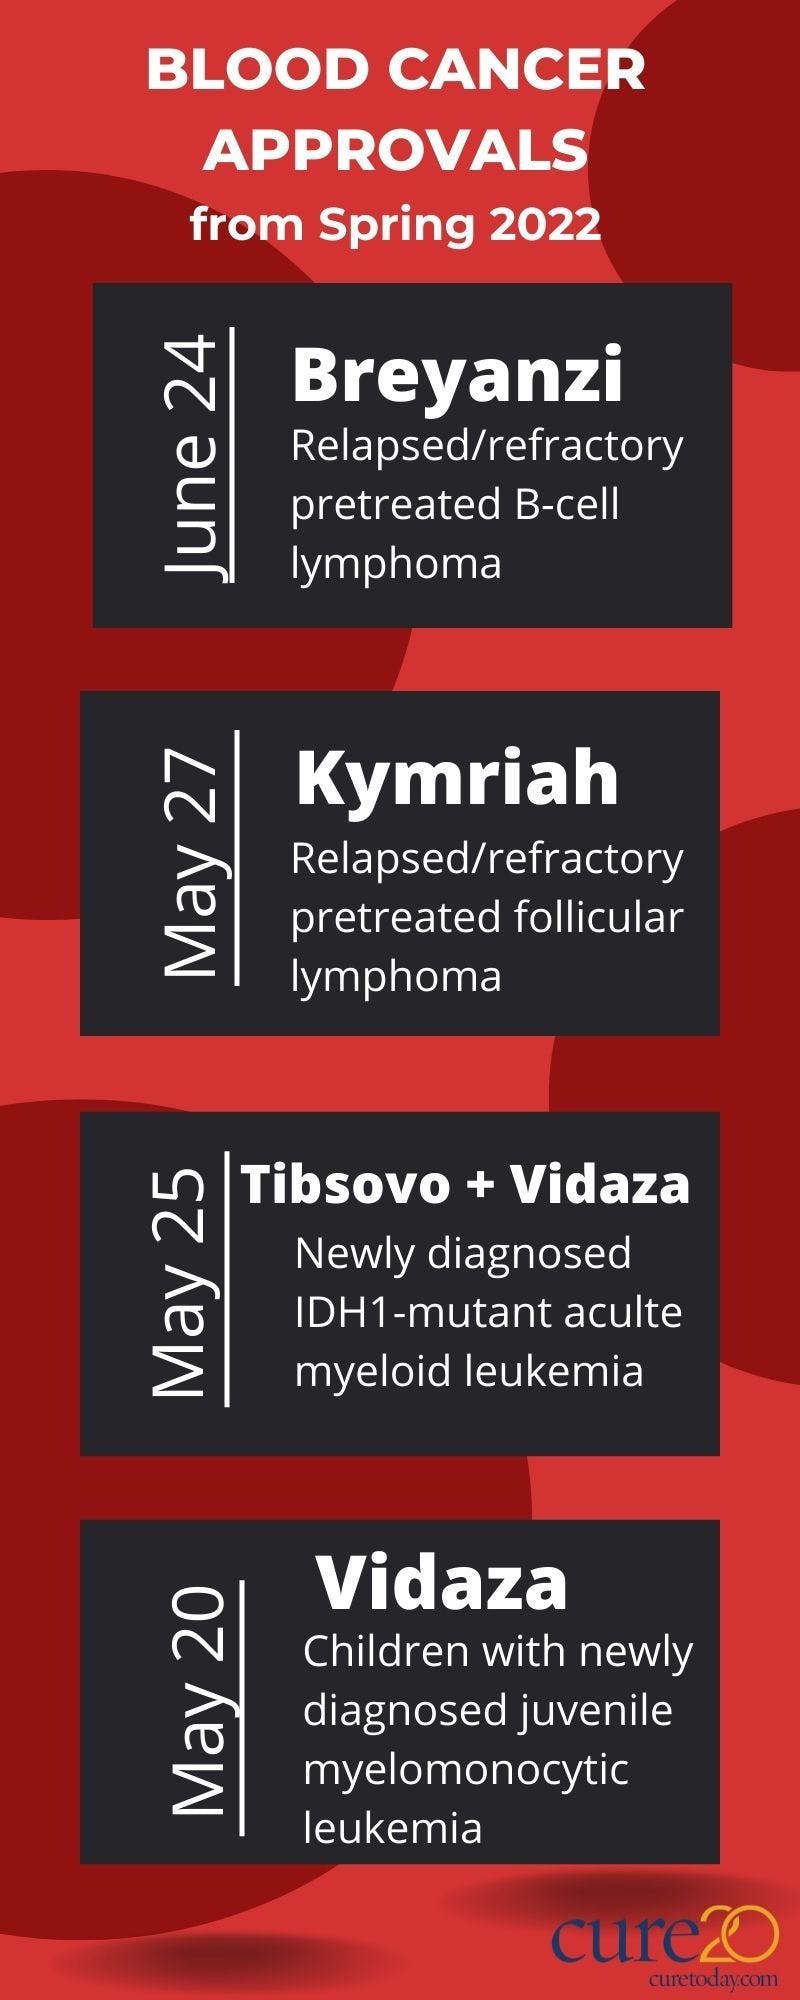 Spring 2022 brought in some landmark blood cancer approvals from the FDA. Here is a roundup of the therapies recently approved by the FDA that patients may have missed.